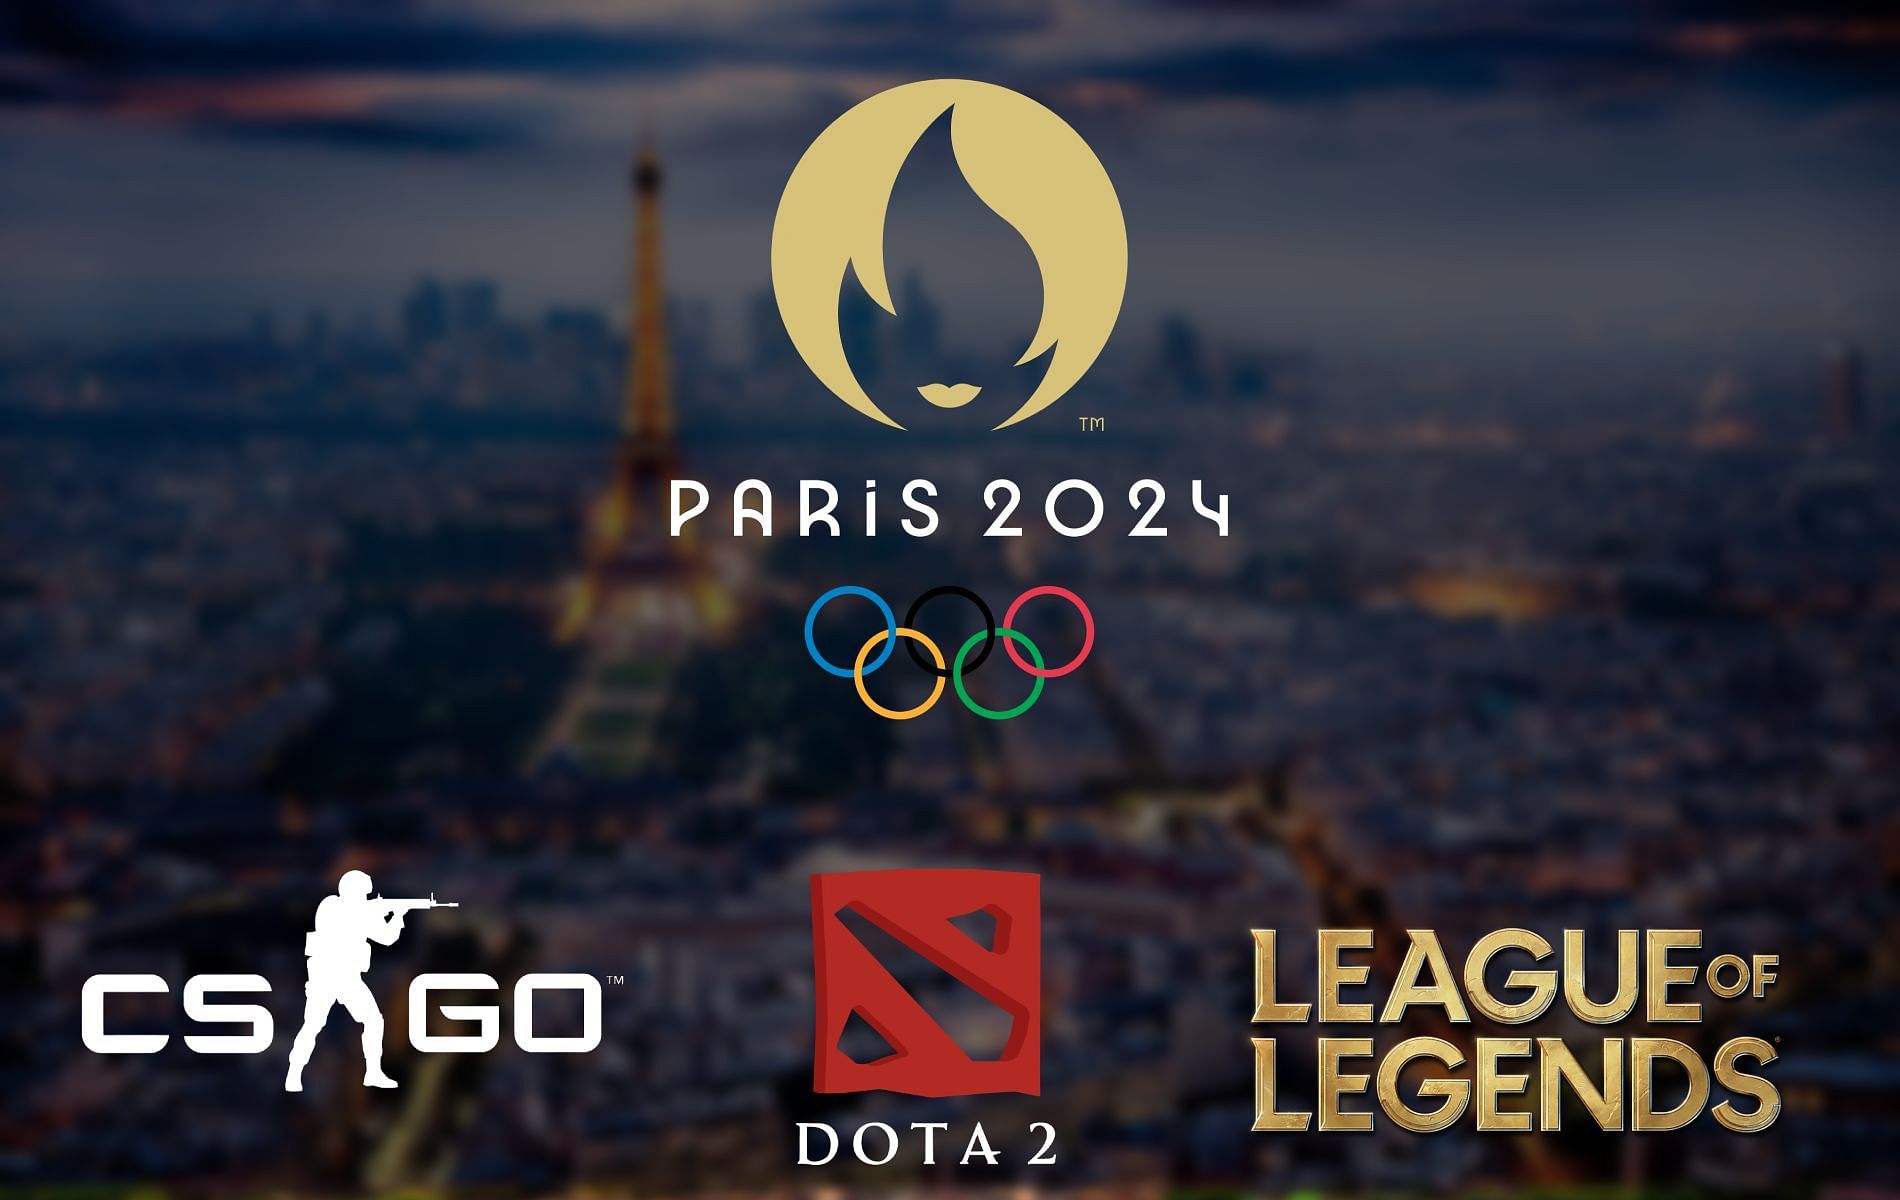 CS:GO, Dota 2 and LoL Worlds might be included in 2024 Paris Olympics as Esports titles (Image via Sportskeeda)